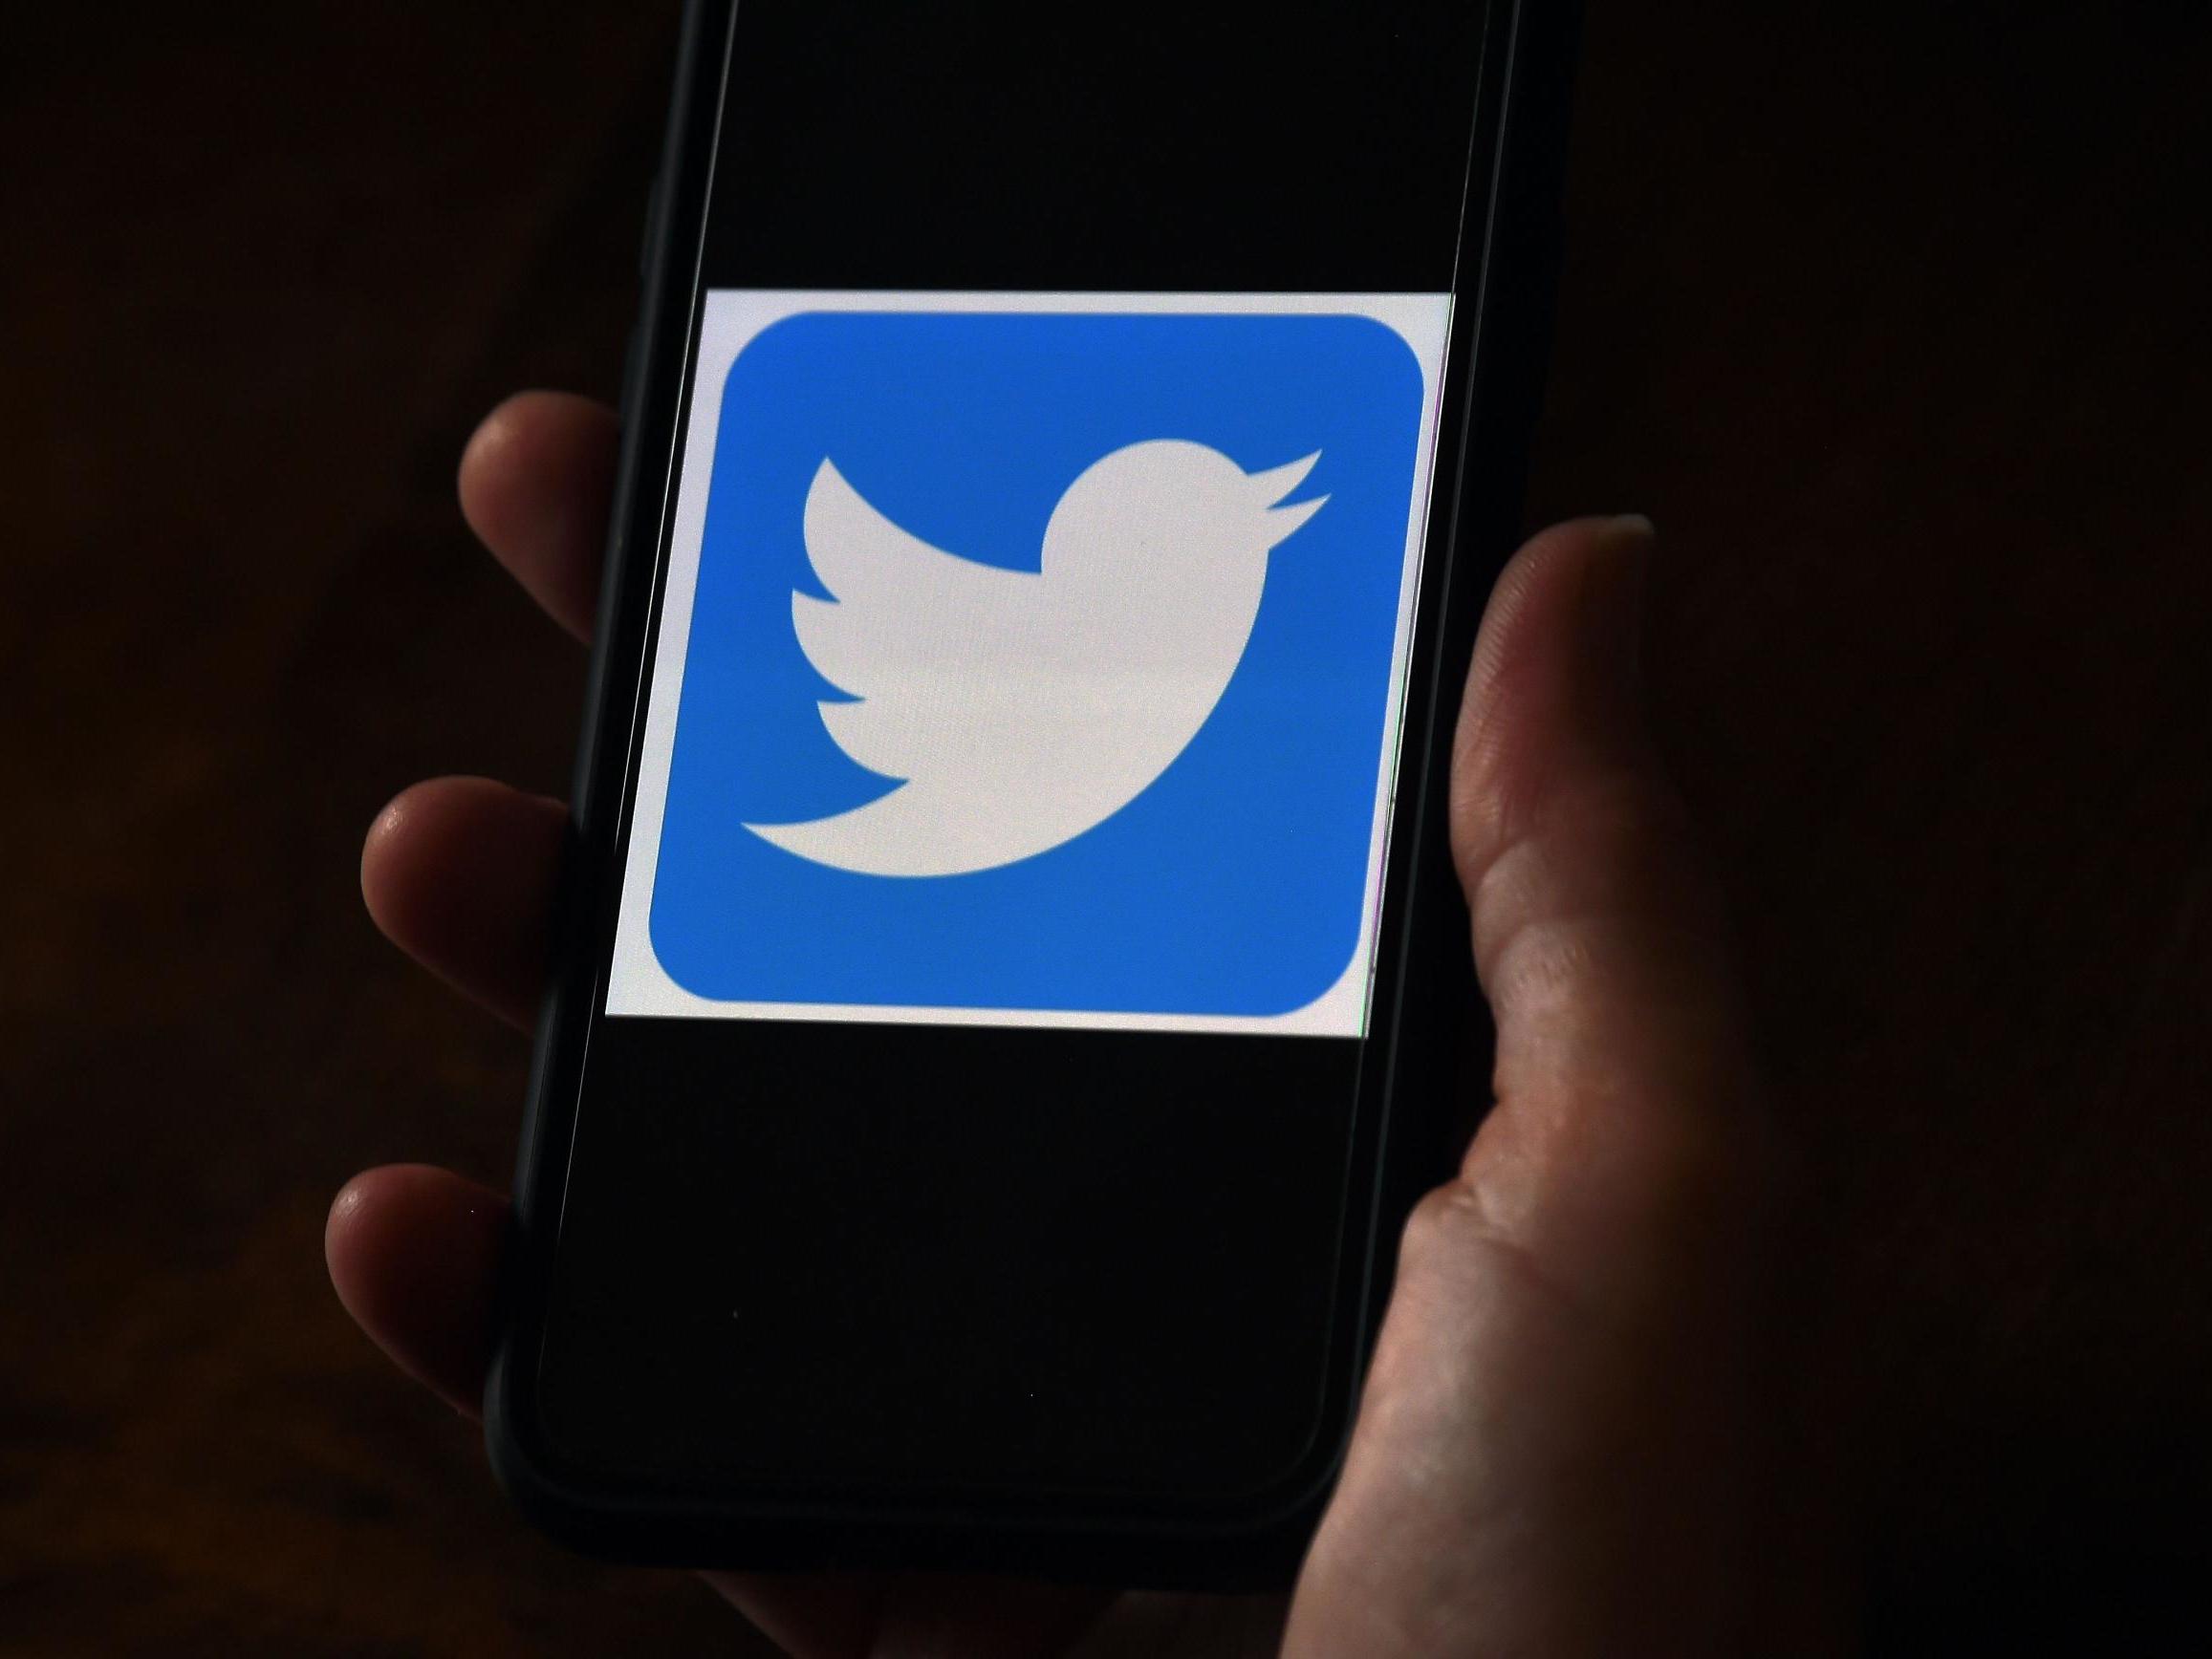 Hackers were able to access Twitter’s internal systems to hijack several high-profile accounts